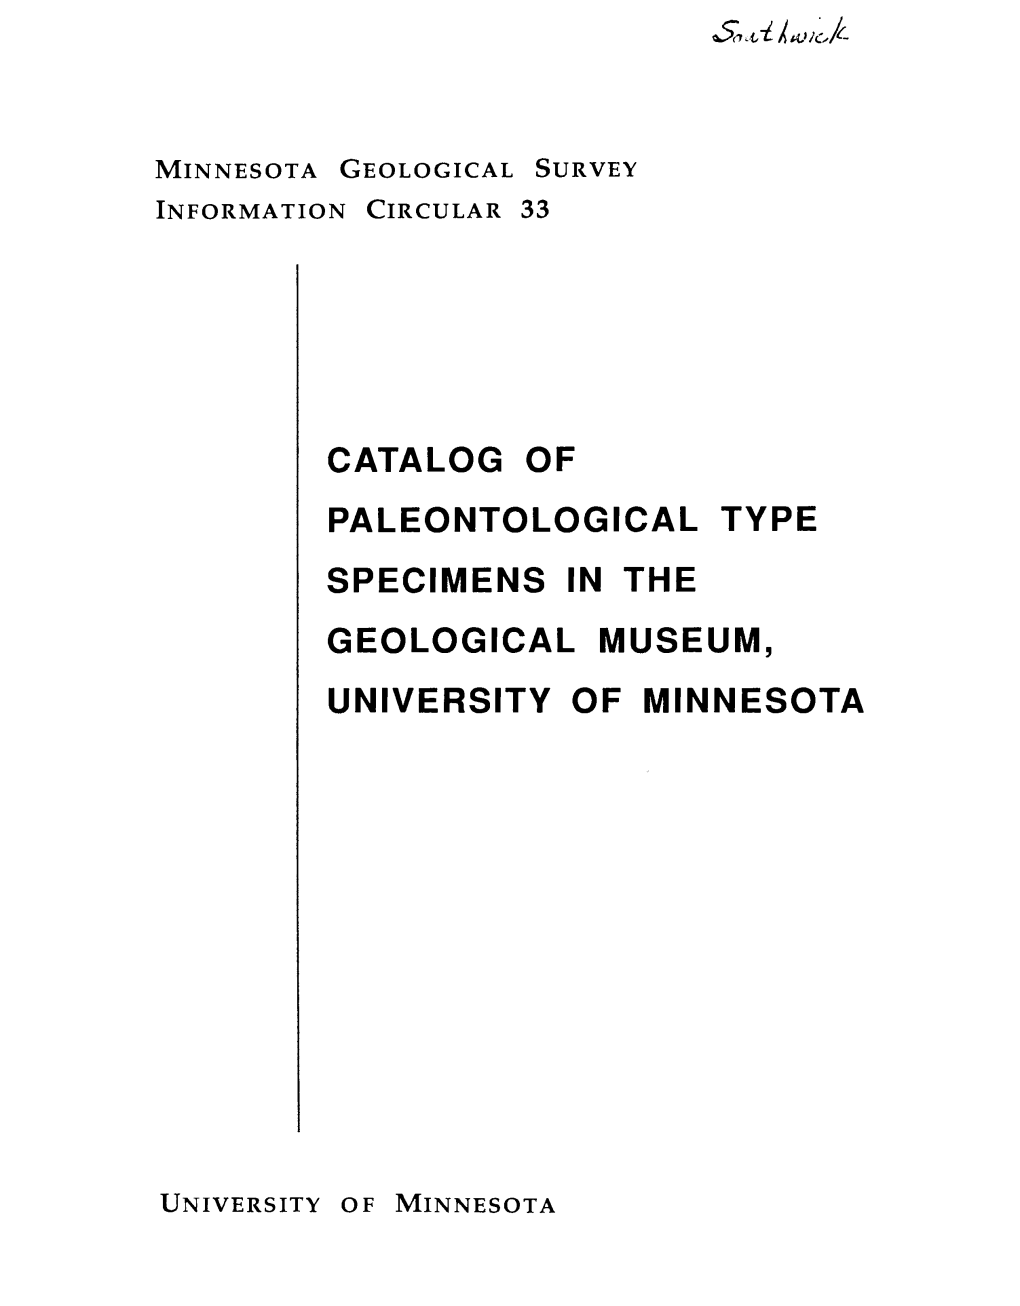 Catalog of Paleontological Type Specimens in the Geological Museum, University of Minnesota